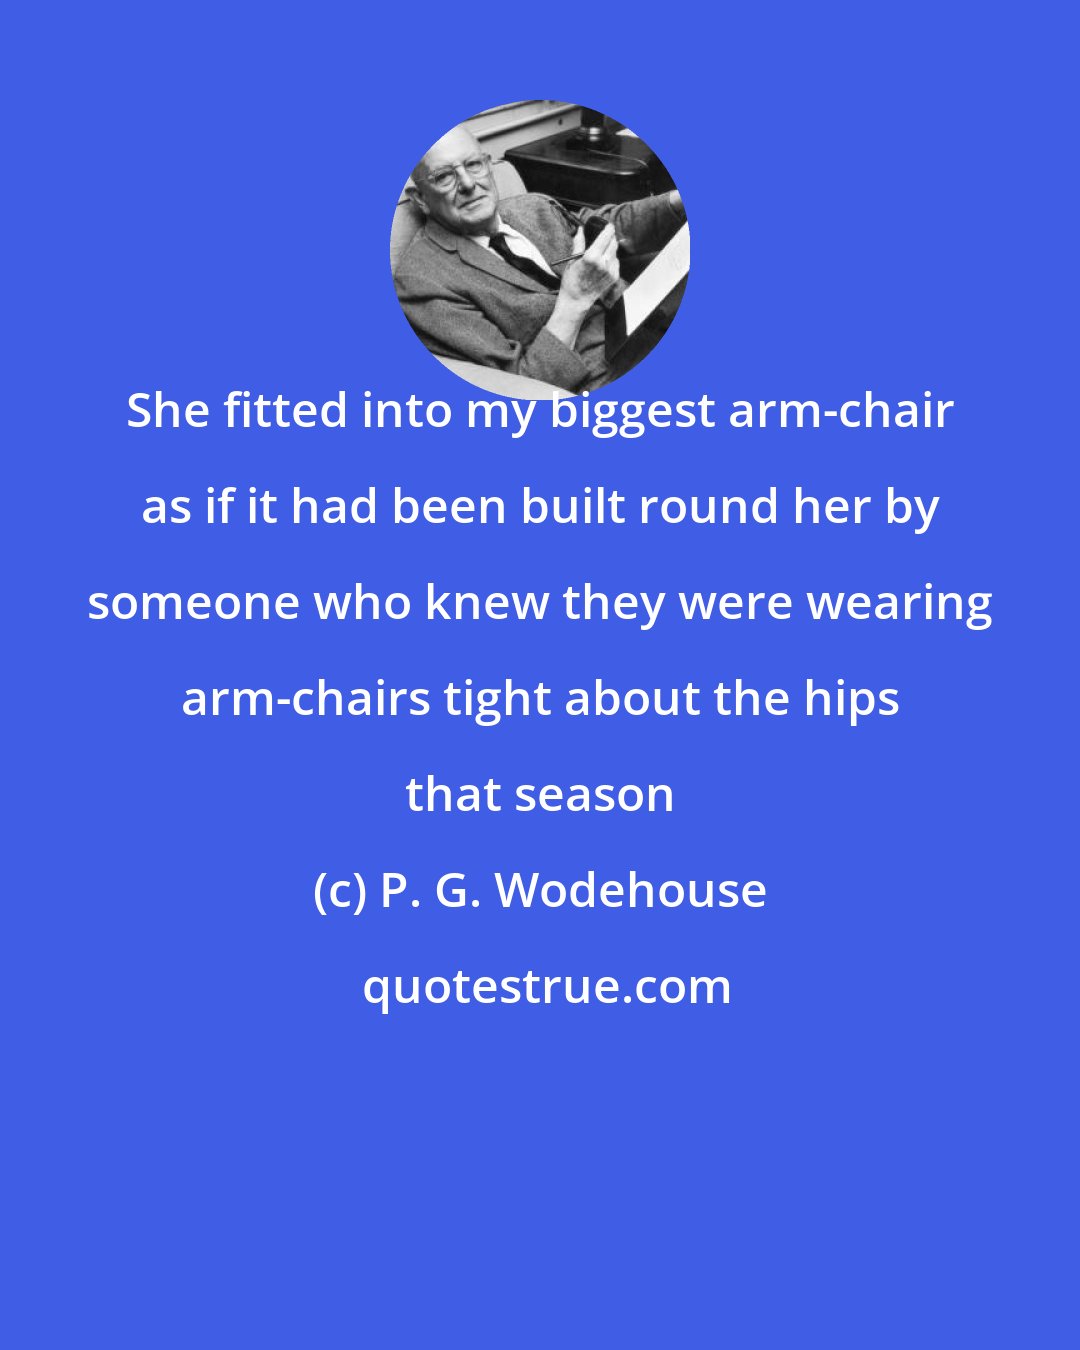 P. G. Wodehouse: She fitted into my biggest arm-chair as if it had been built round her by someone who knew they were wearing arm-chairs tight about the hips that season